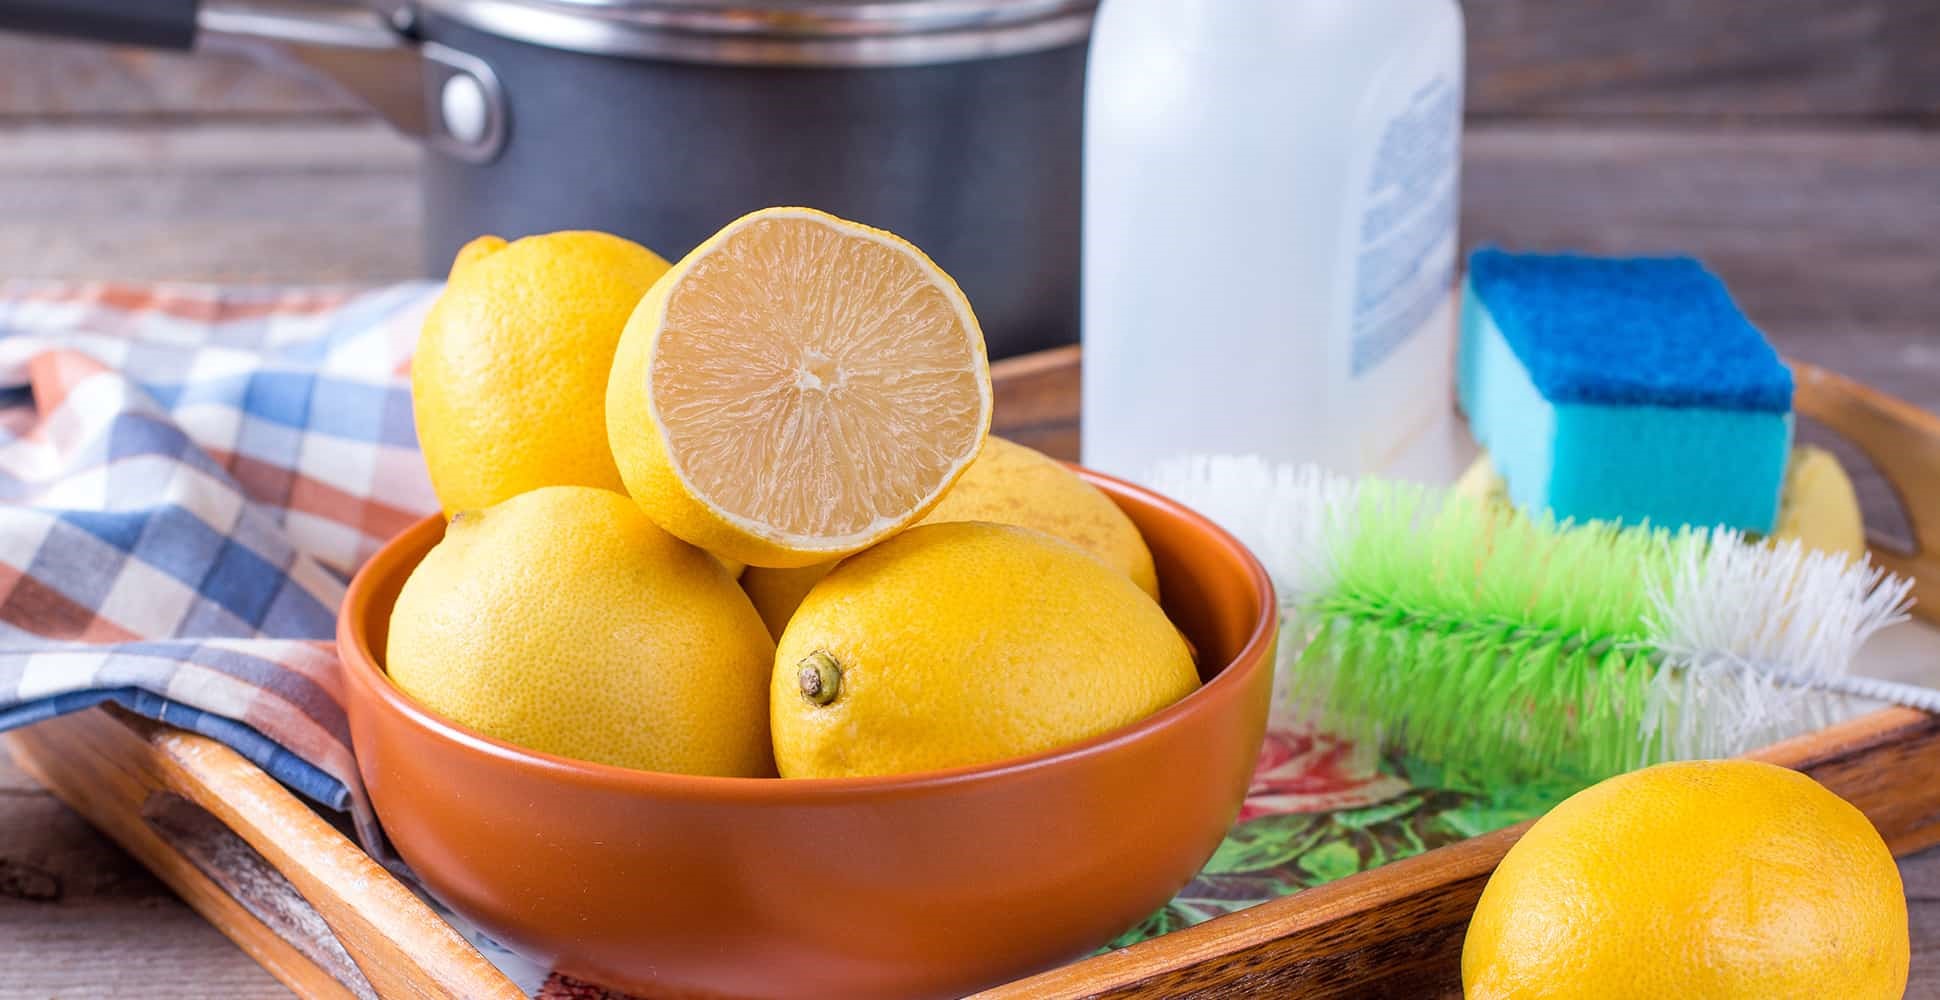 Natural Cleaning Products